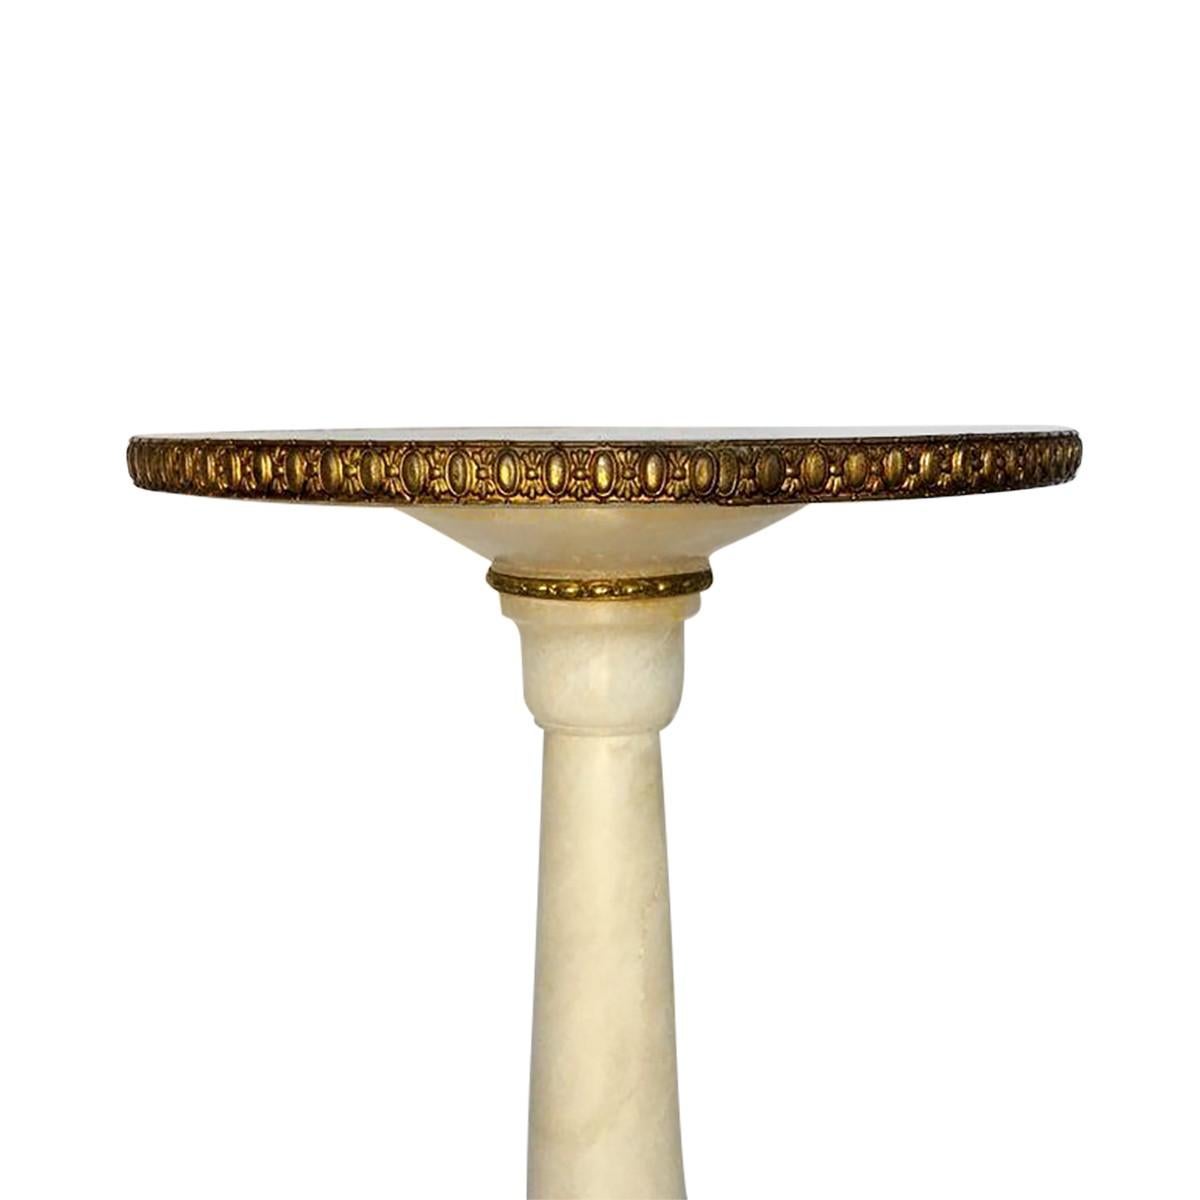 Small round alabaster marble drinks spot table with decorative brass and gold metal detailing. This small accent occasional side or end table features a neoclassical style pedestal column base, circa early 20th century, Italy.
  